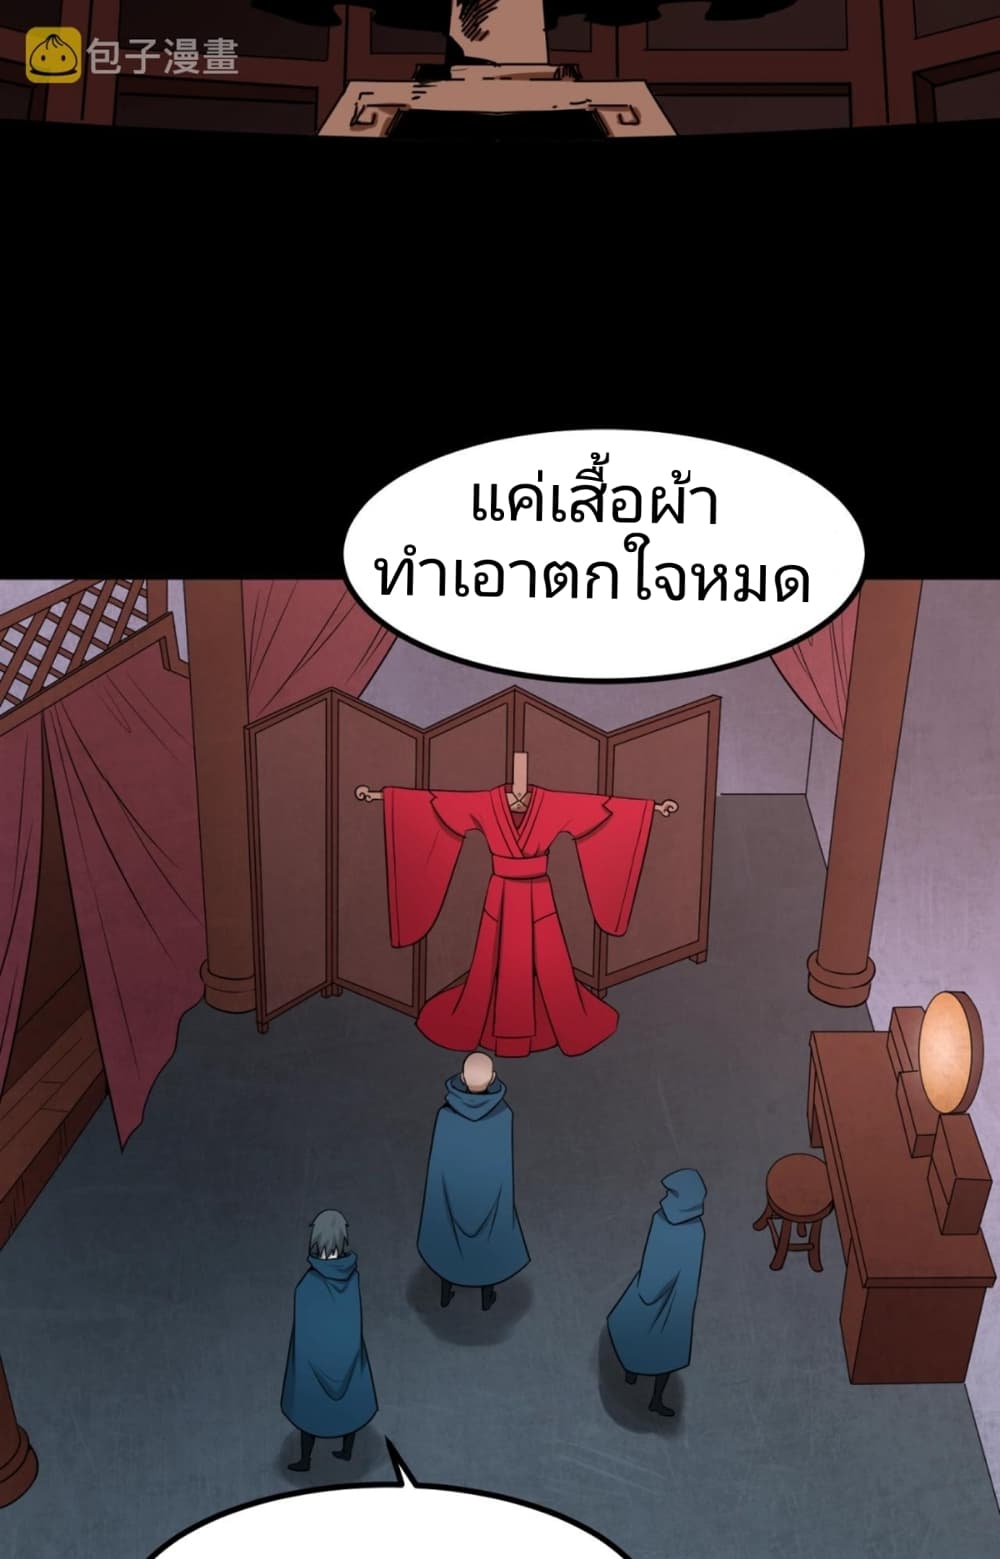 The Age of Ghost Spirits à¸à¸­à¸à¸à¸µà¹ 8 (10)